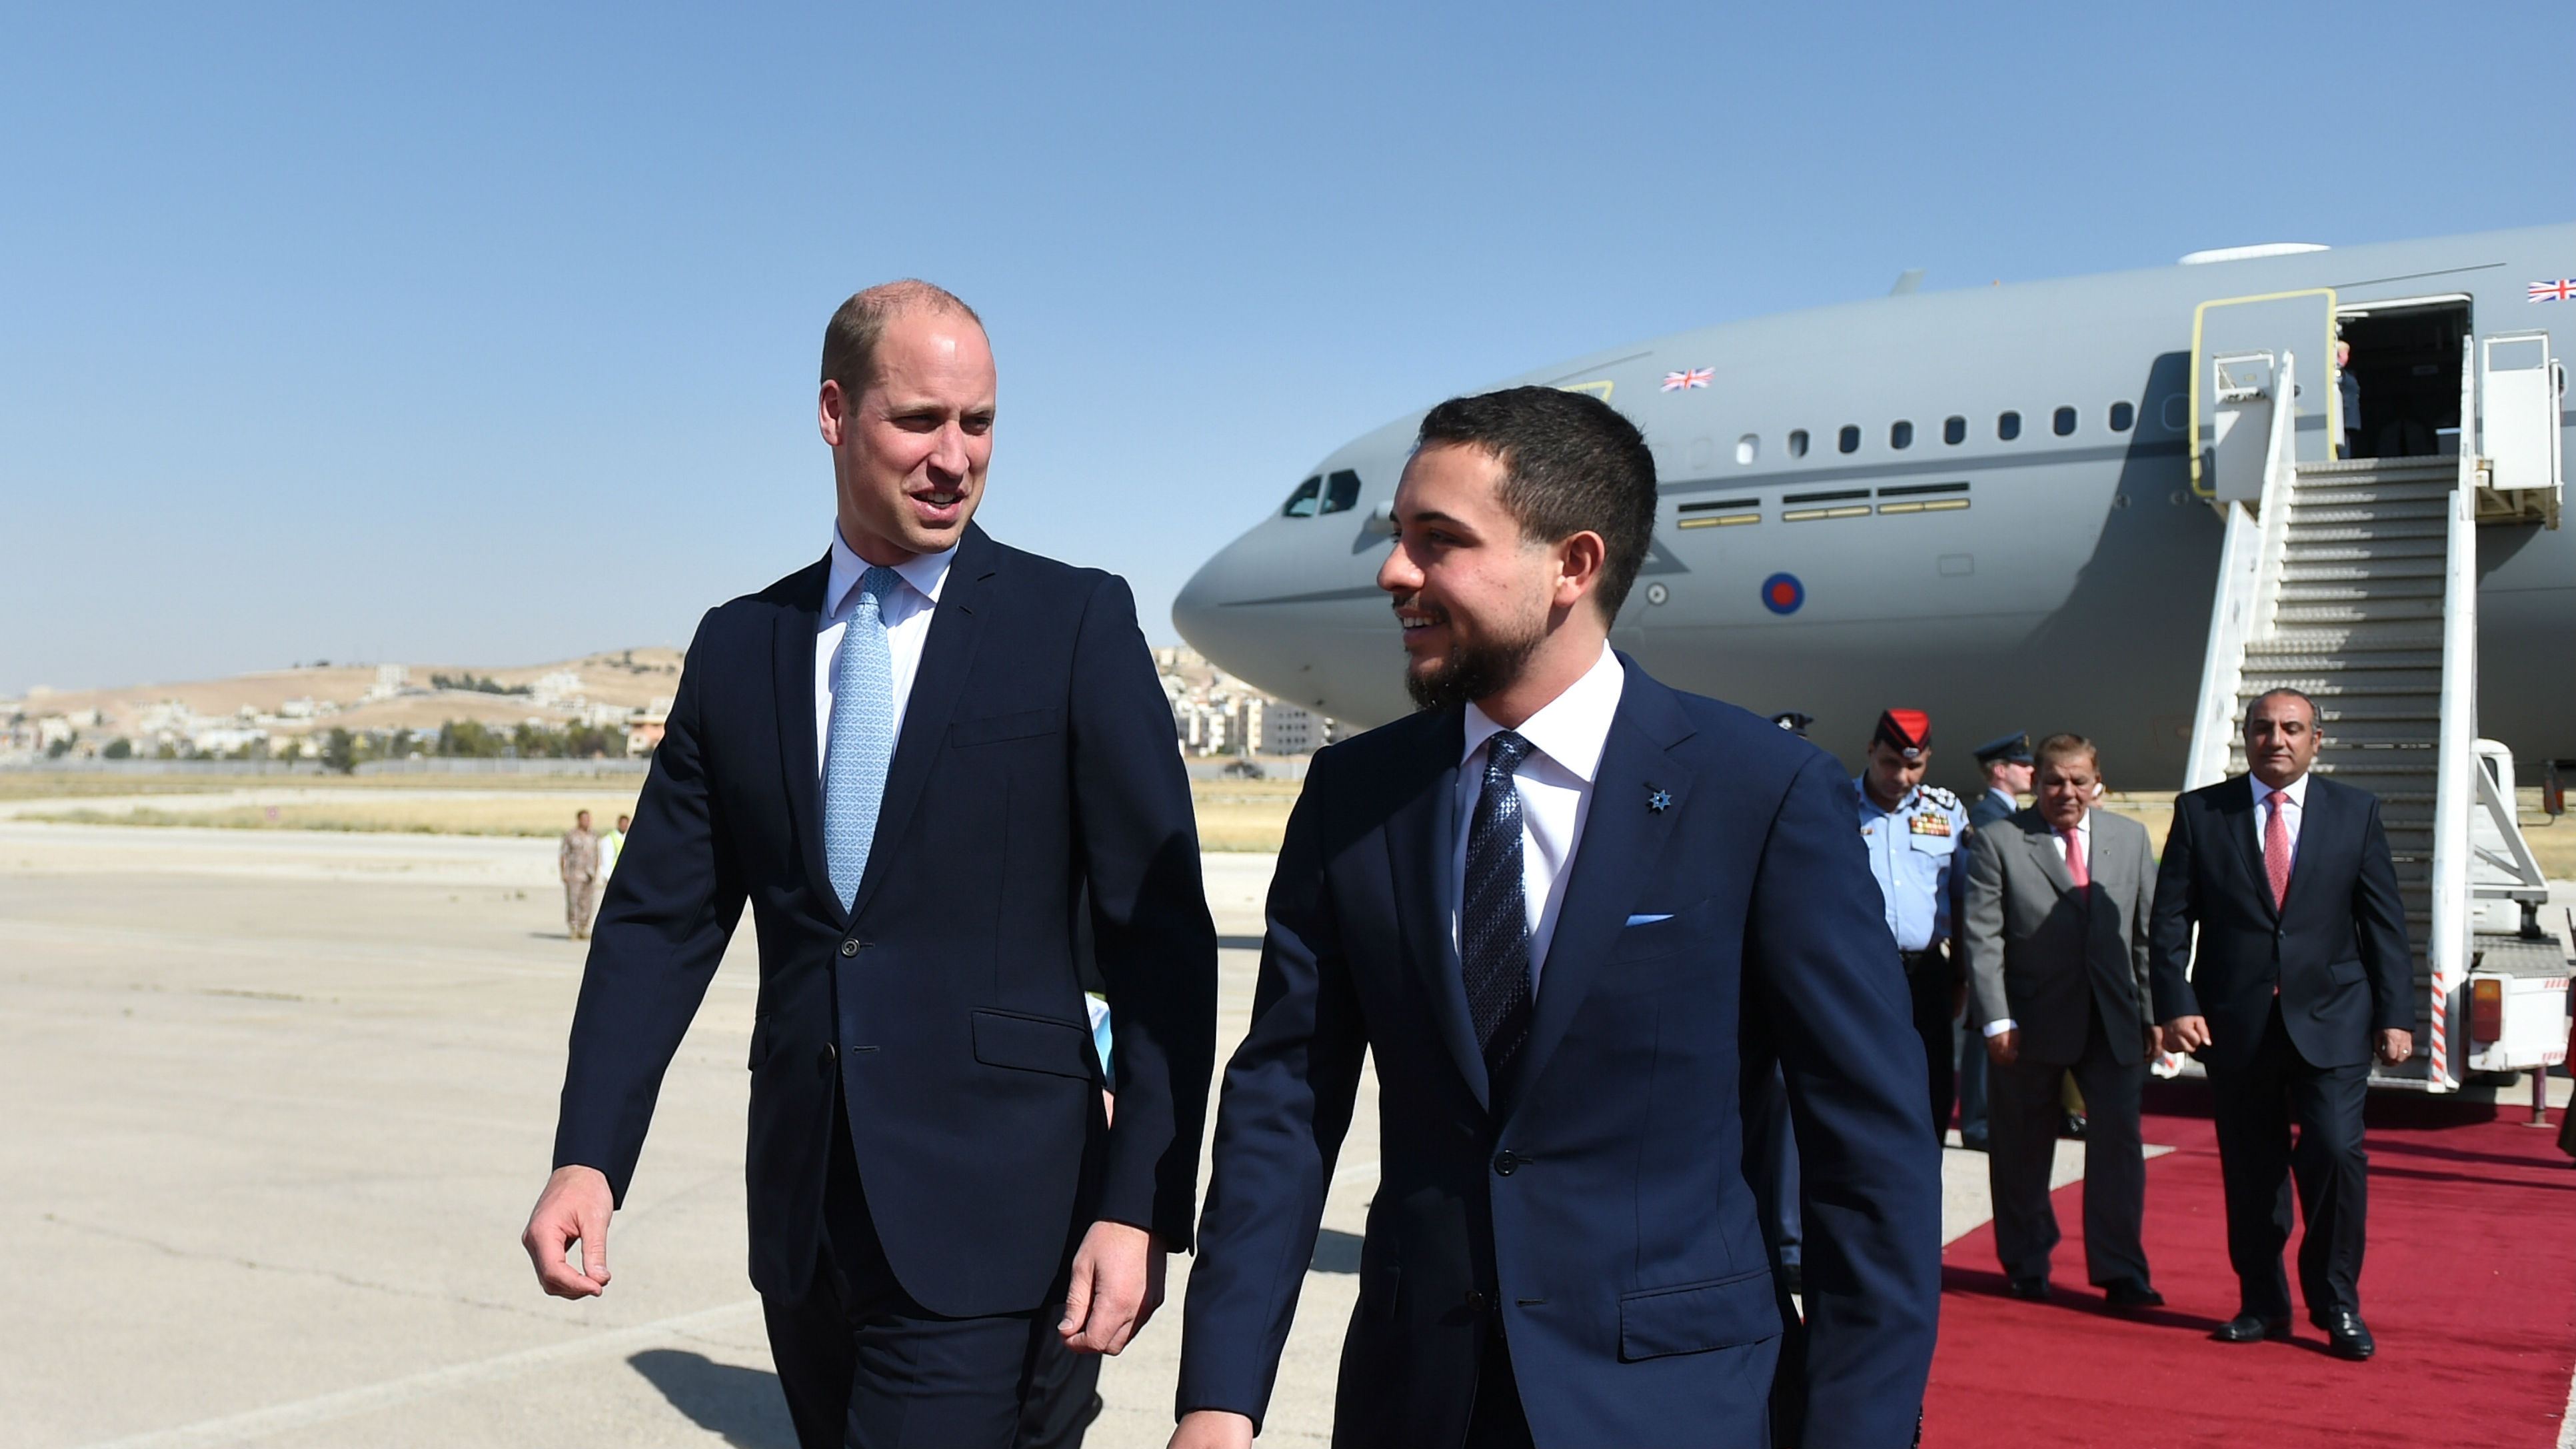 180625_prince_william_middle_east.jpg